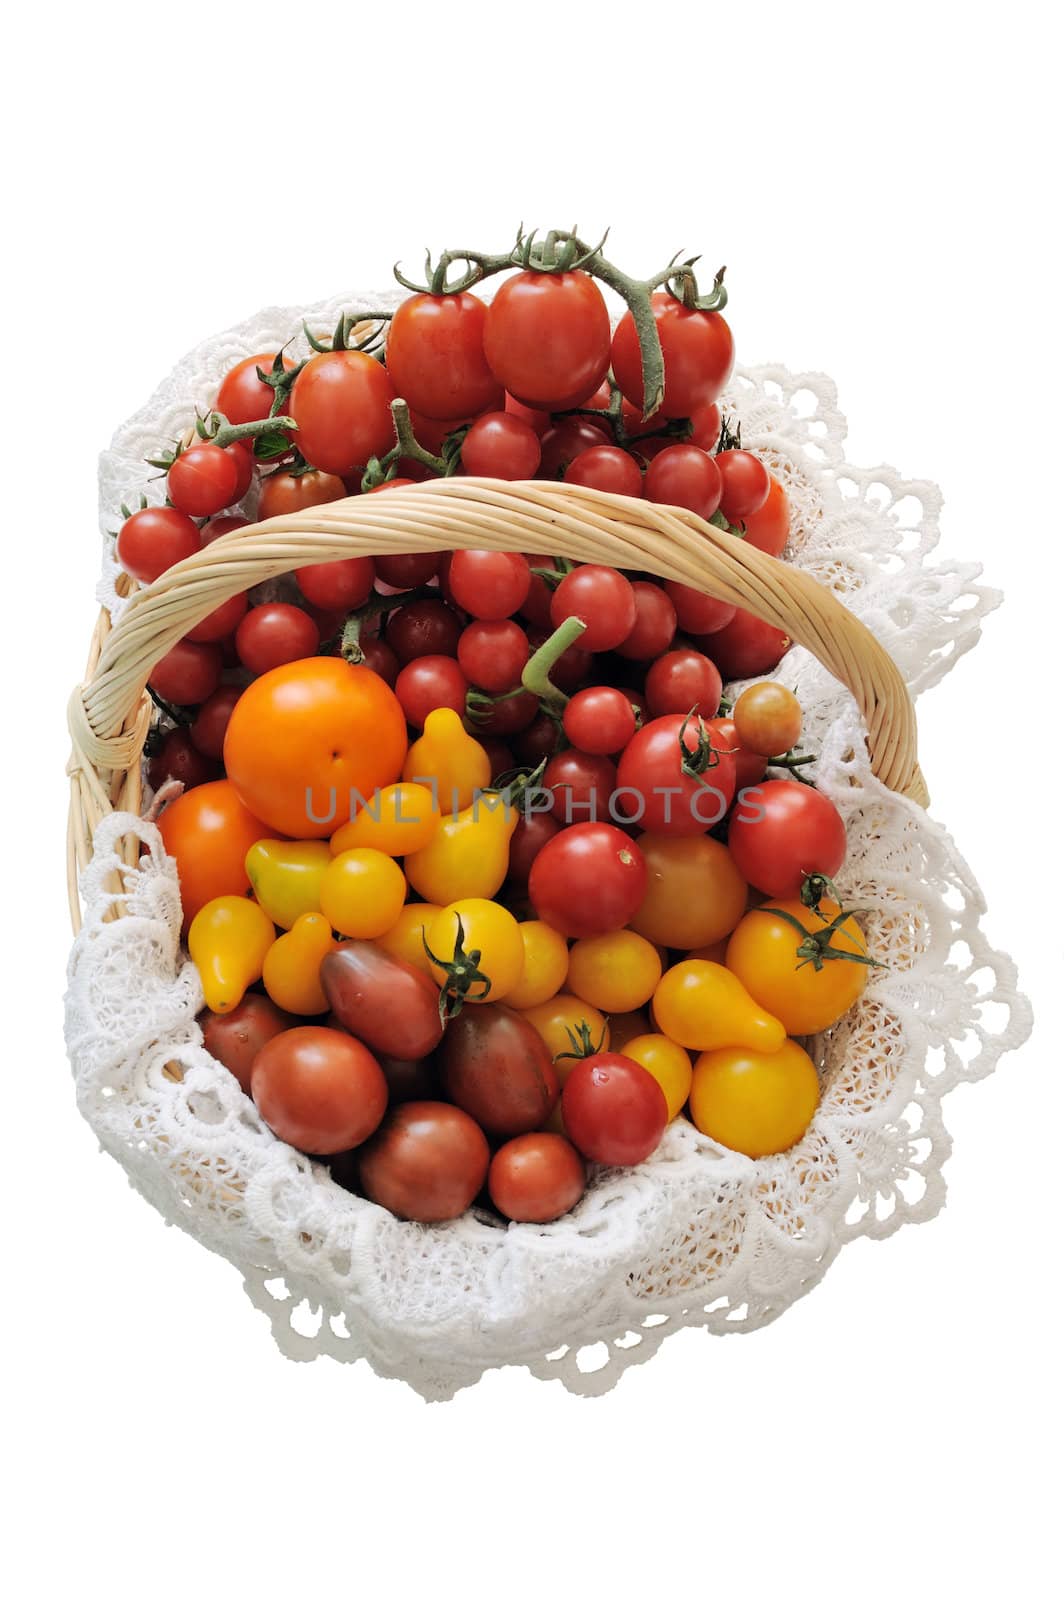 Different varieties of tomatoes in a basket on a white background